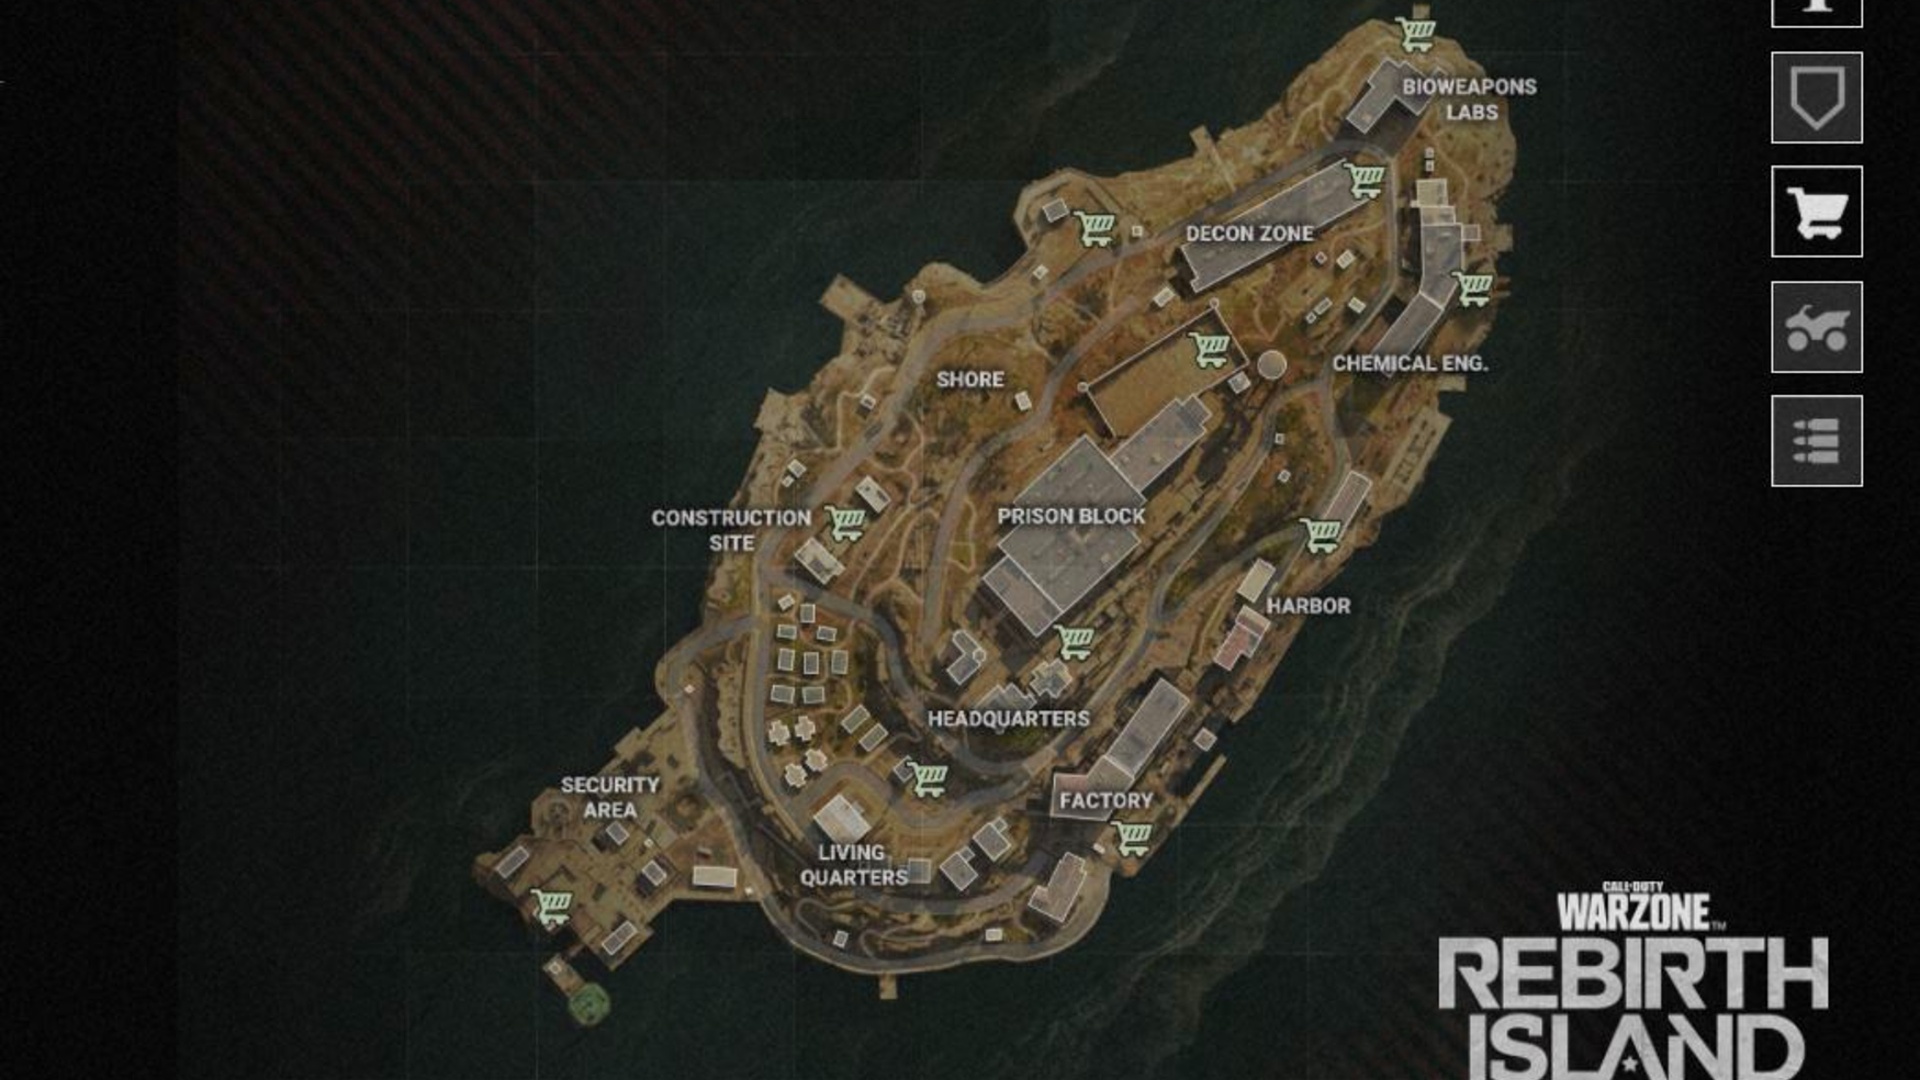 Warzone Rebirth Island: An overview of all the buy stations, shown on the map of Rebirth Island.